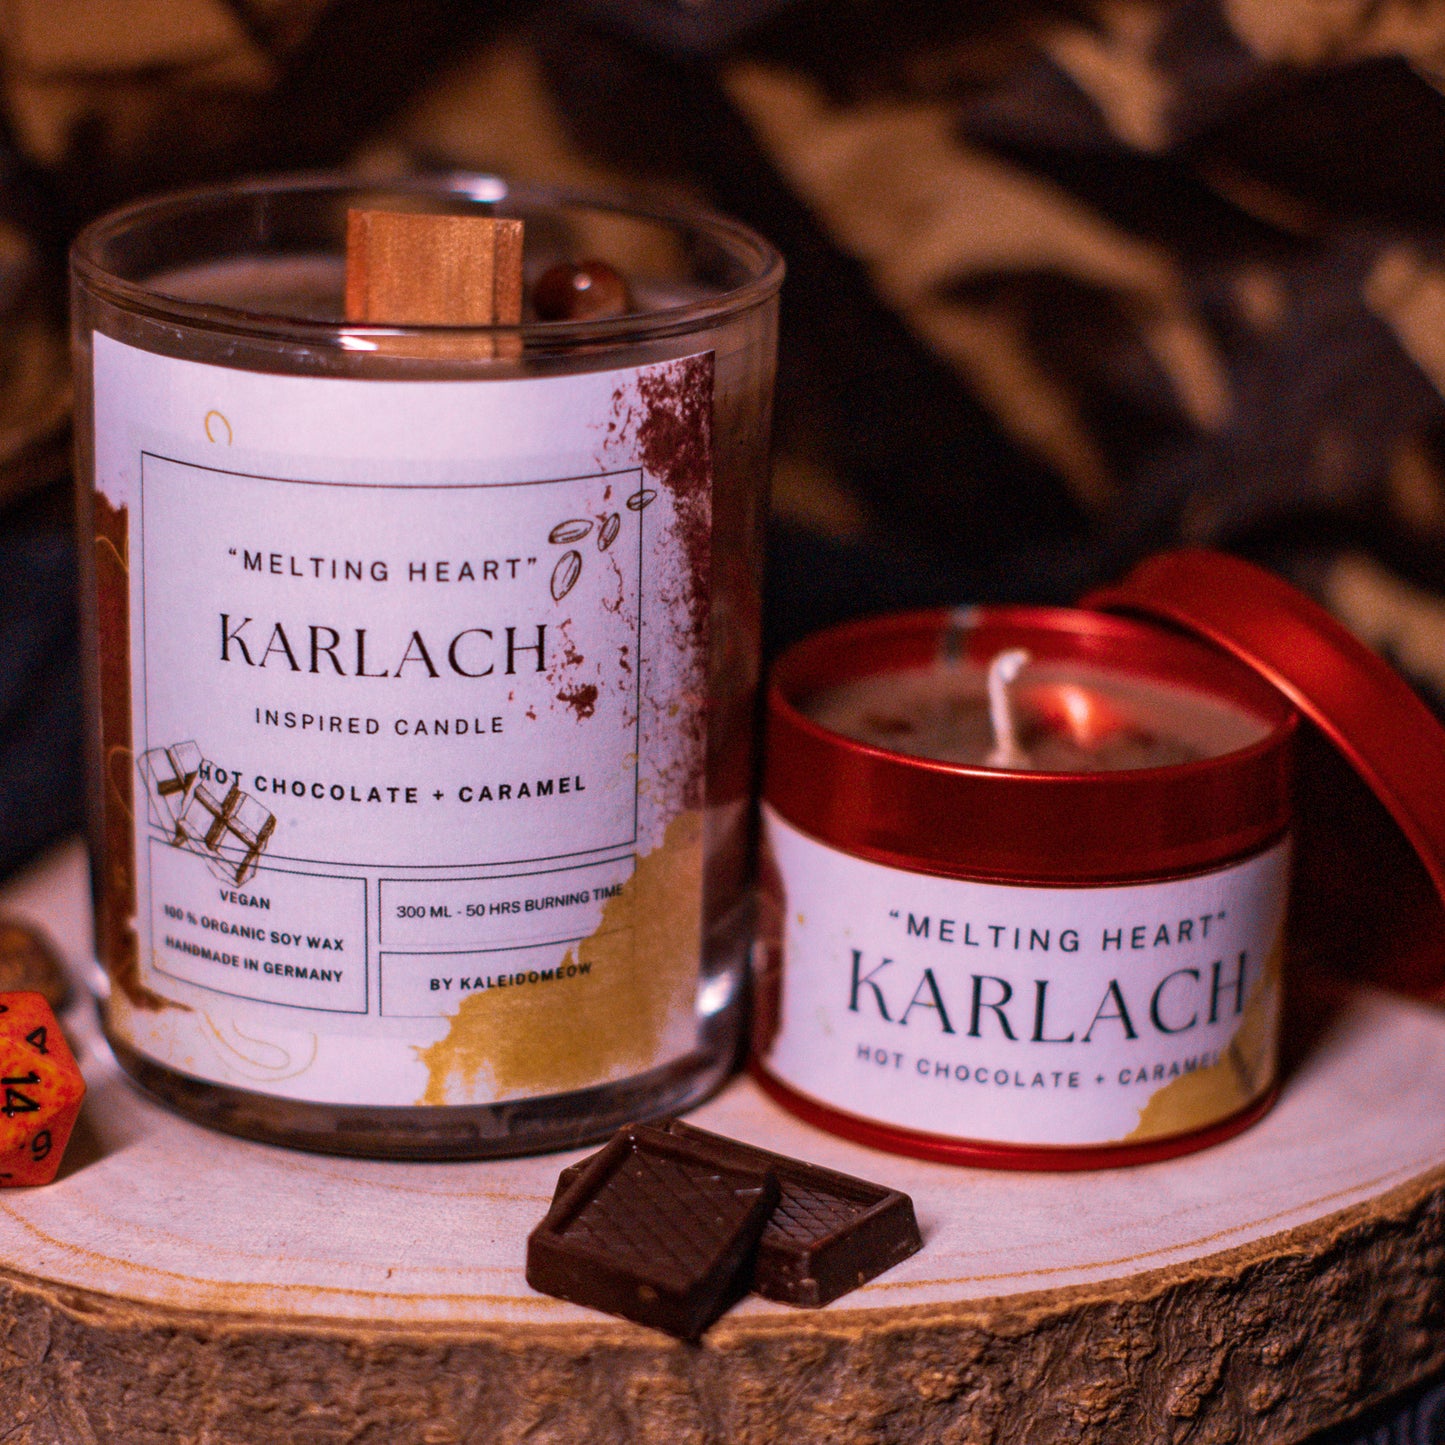 KARLACH inspired candle - 'Melting Heart' Baldur's Gate 3 inspired soy candle 300 ML